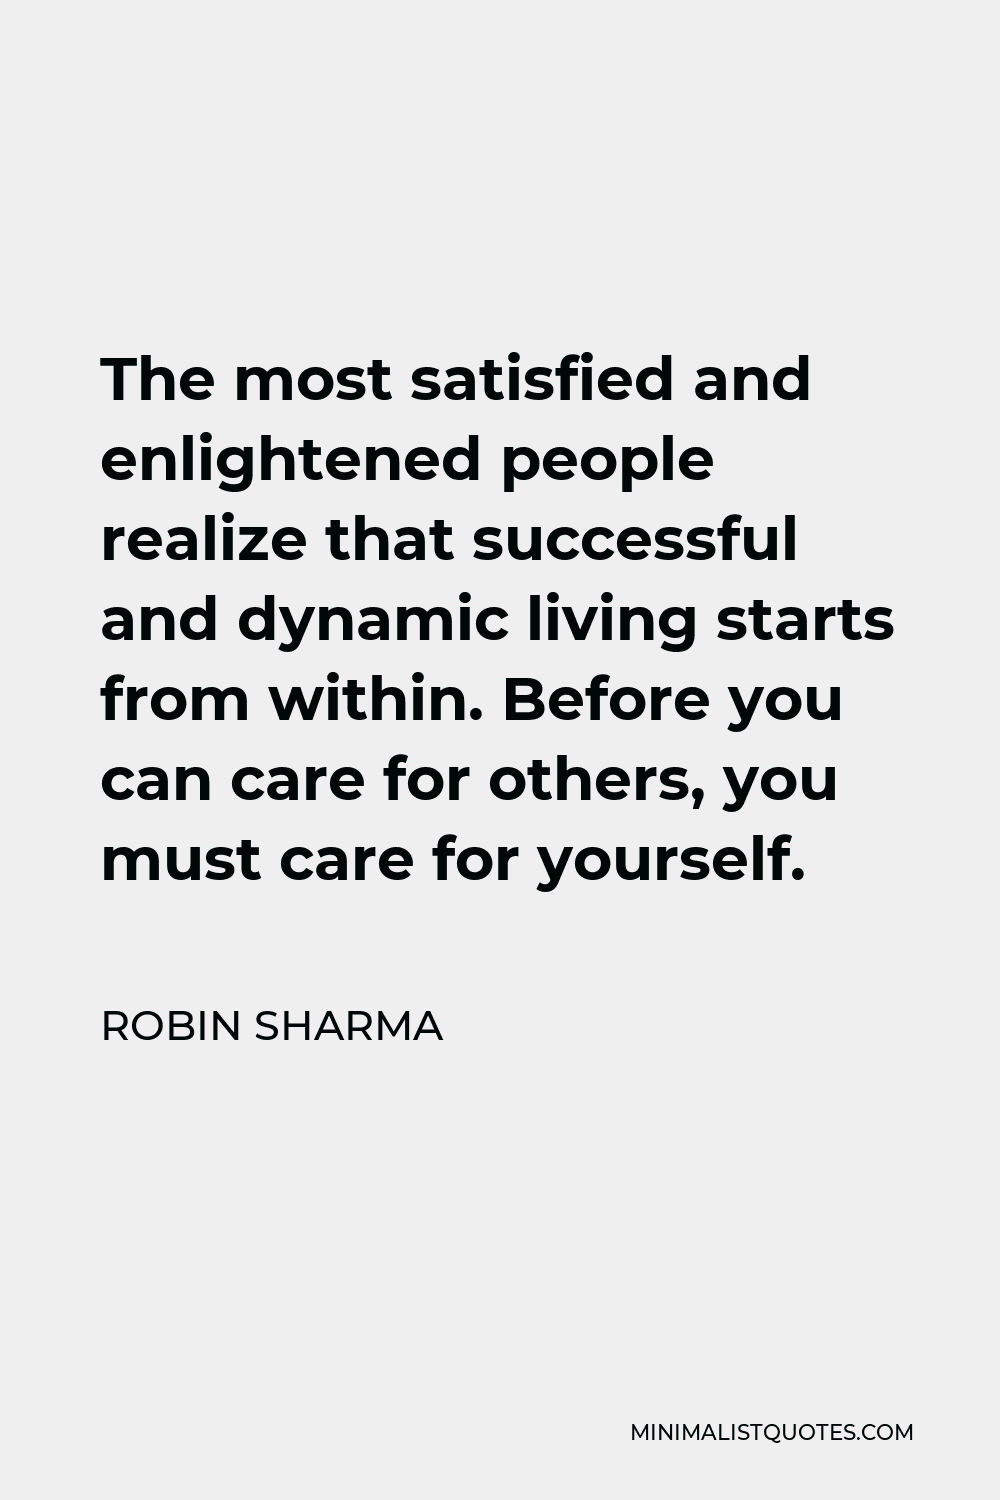 Robin Sharma Quote - The most satisfied and enlightened people realize that successful and dynamic living starts from within. Before you can care for others, you must care for yourself.